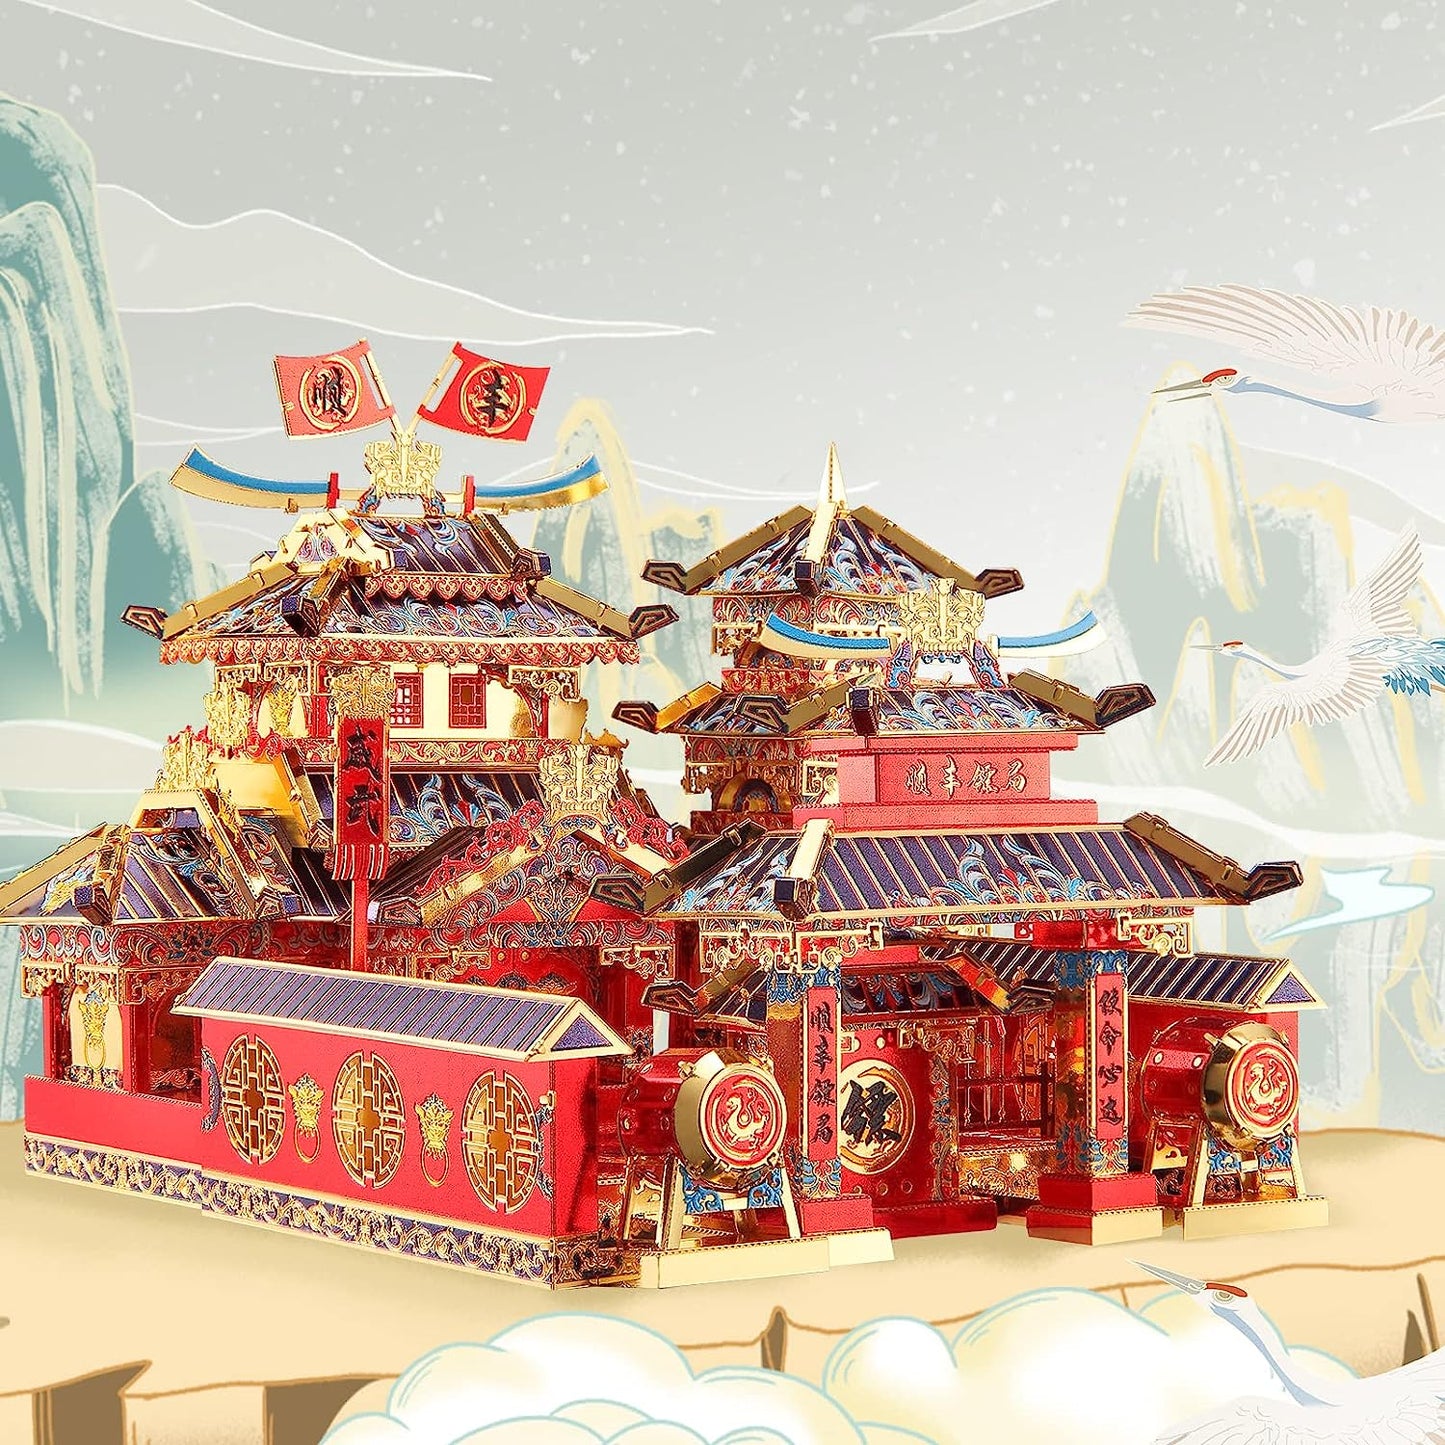 Piececool Chinese Ancient Bodyguard Building Model Kits,148pcs